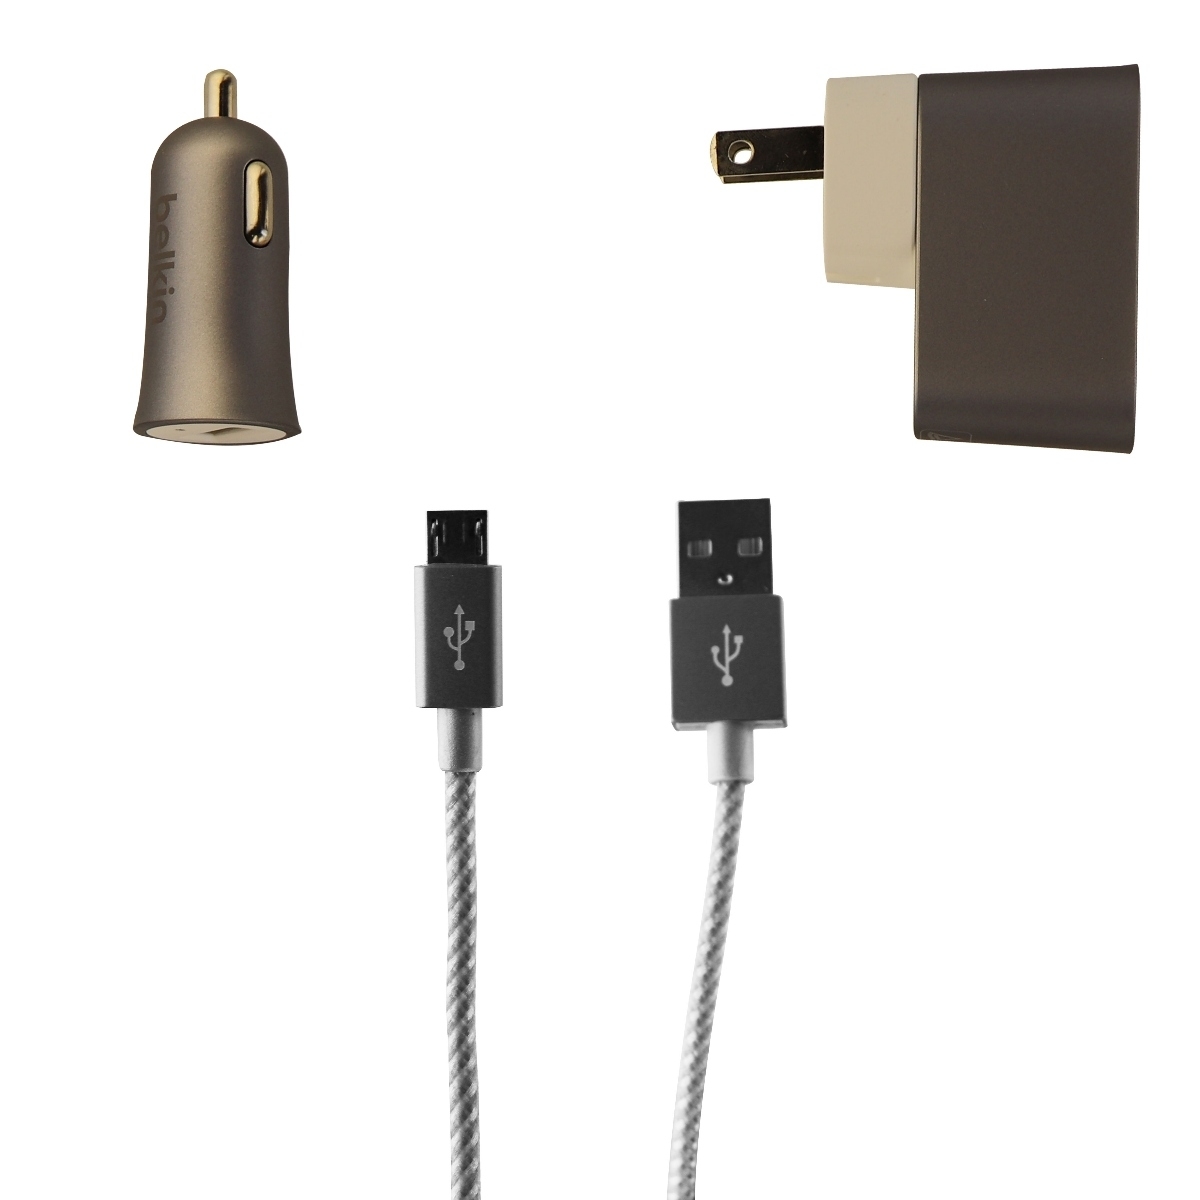 Belkin Mixit Up Series 2.4A Premium Charging Kit w/Micro USB Cable - Space Gray (Refurbished)